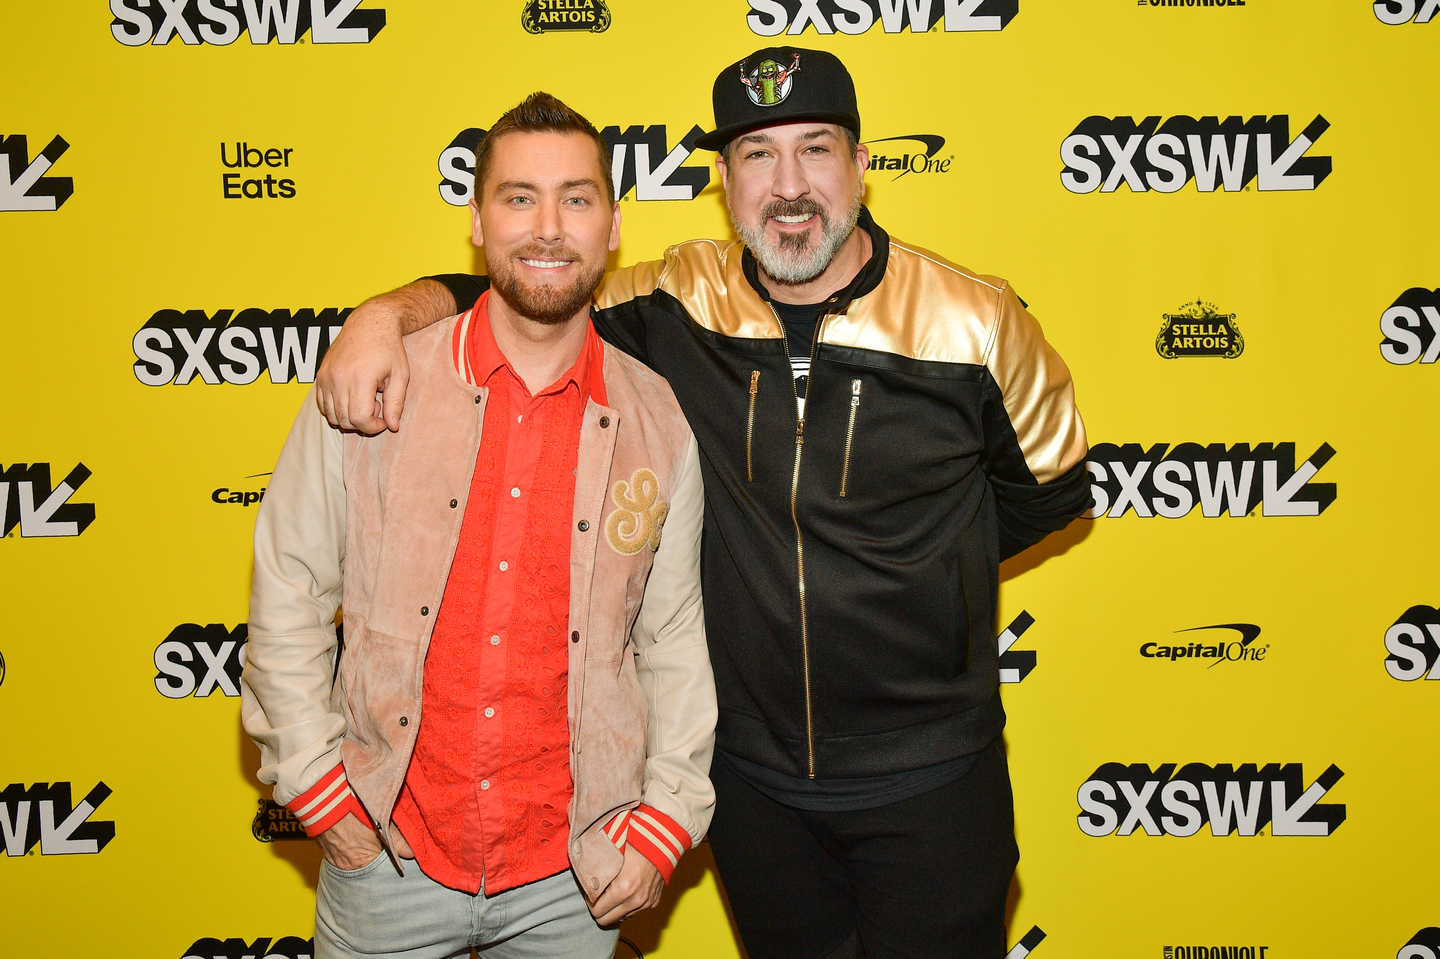 Lance Bass and Joey Fatone attend the premiere of The Boy Band Con: The Lou Pearlman Story at the Paramount Theatre.